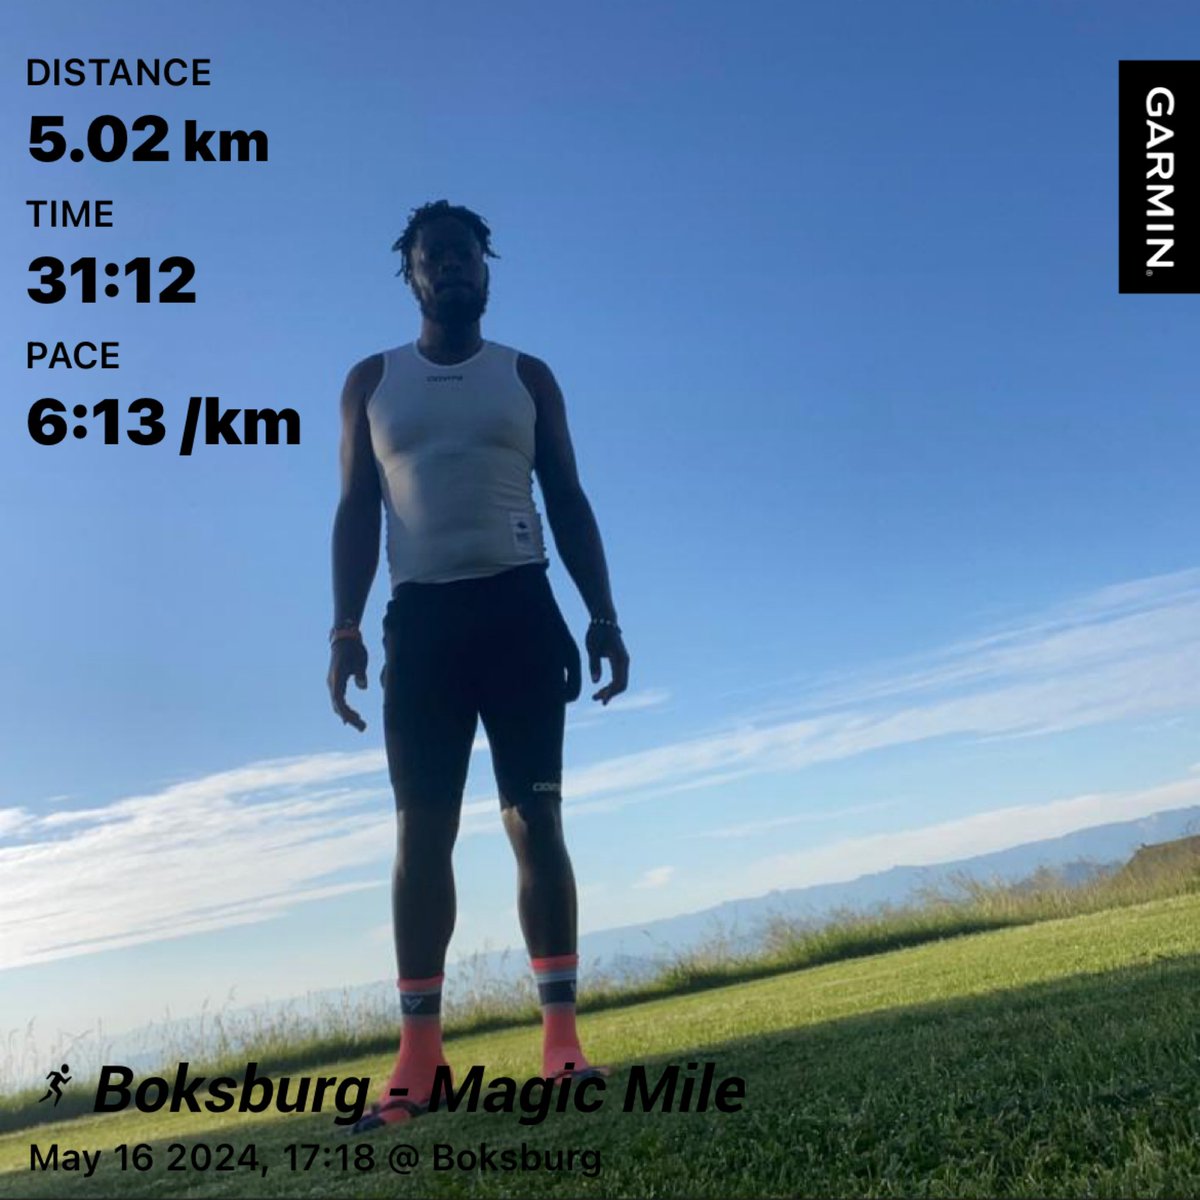 Foolish Thursday afternoon run 🏃🏿‍♂️ 🦅
#FetchYourBody2024 
#TrapnLos 
#IPaintedMyRun 
#Khozoskithefinisher 
#Khozoskithecyclist 

When you have fitness you can do anything anytime and anywhere.